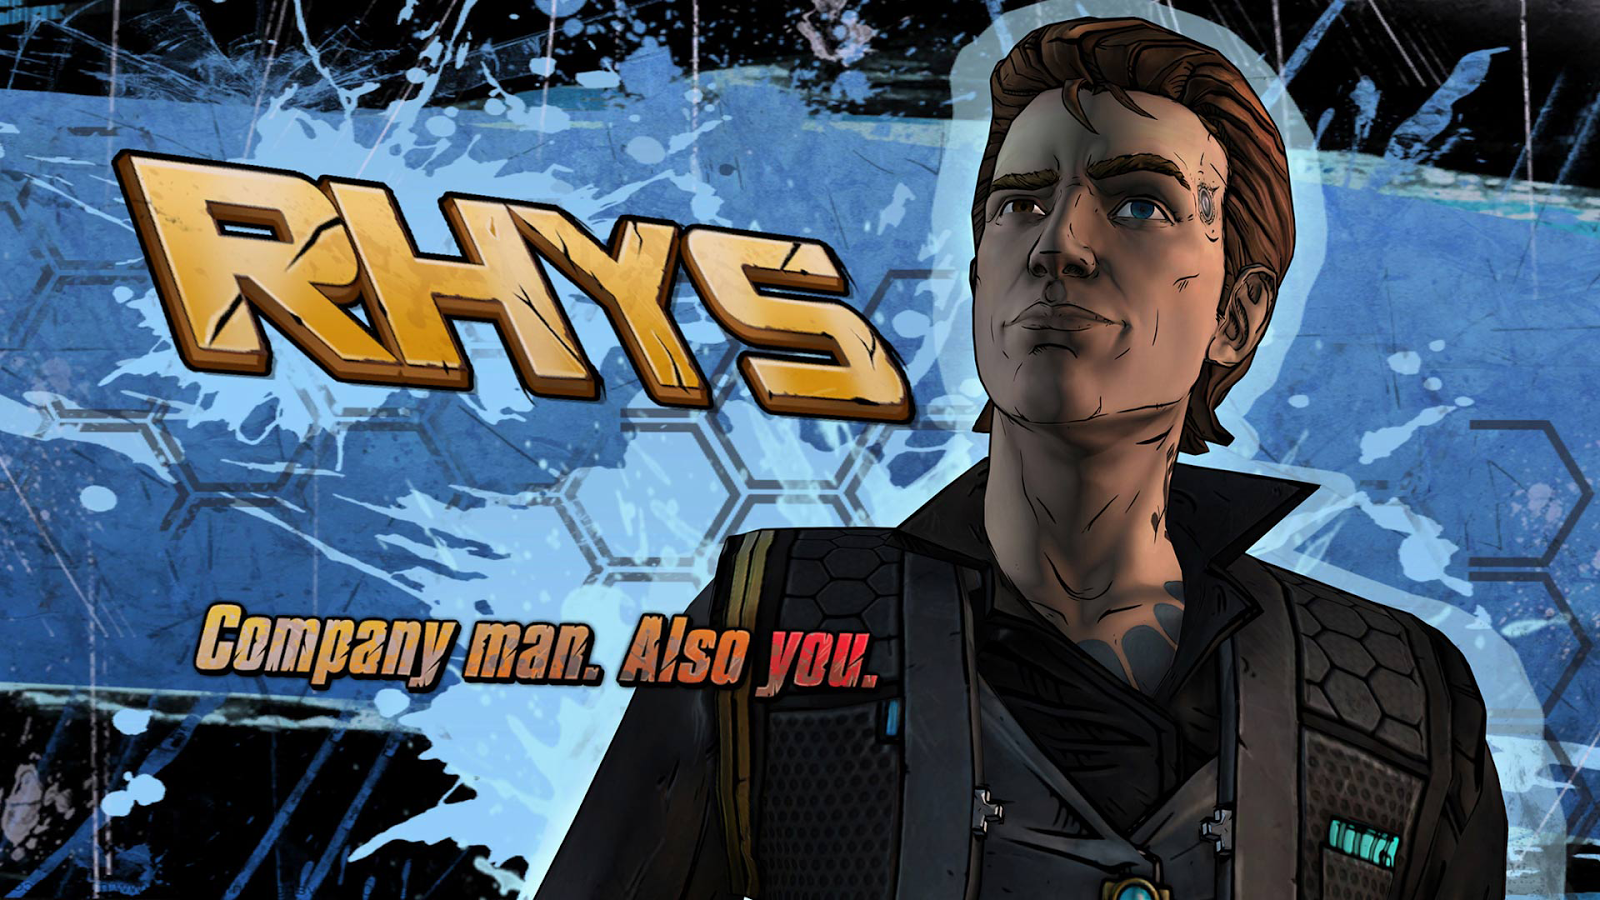 Tales From The Borderlands High Quality Background on Wallpapers Vista